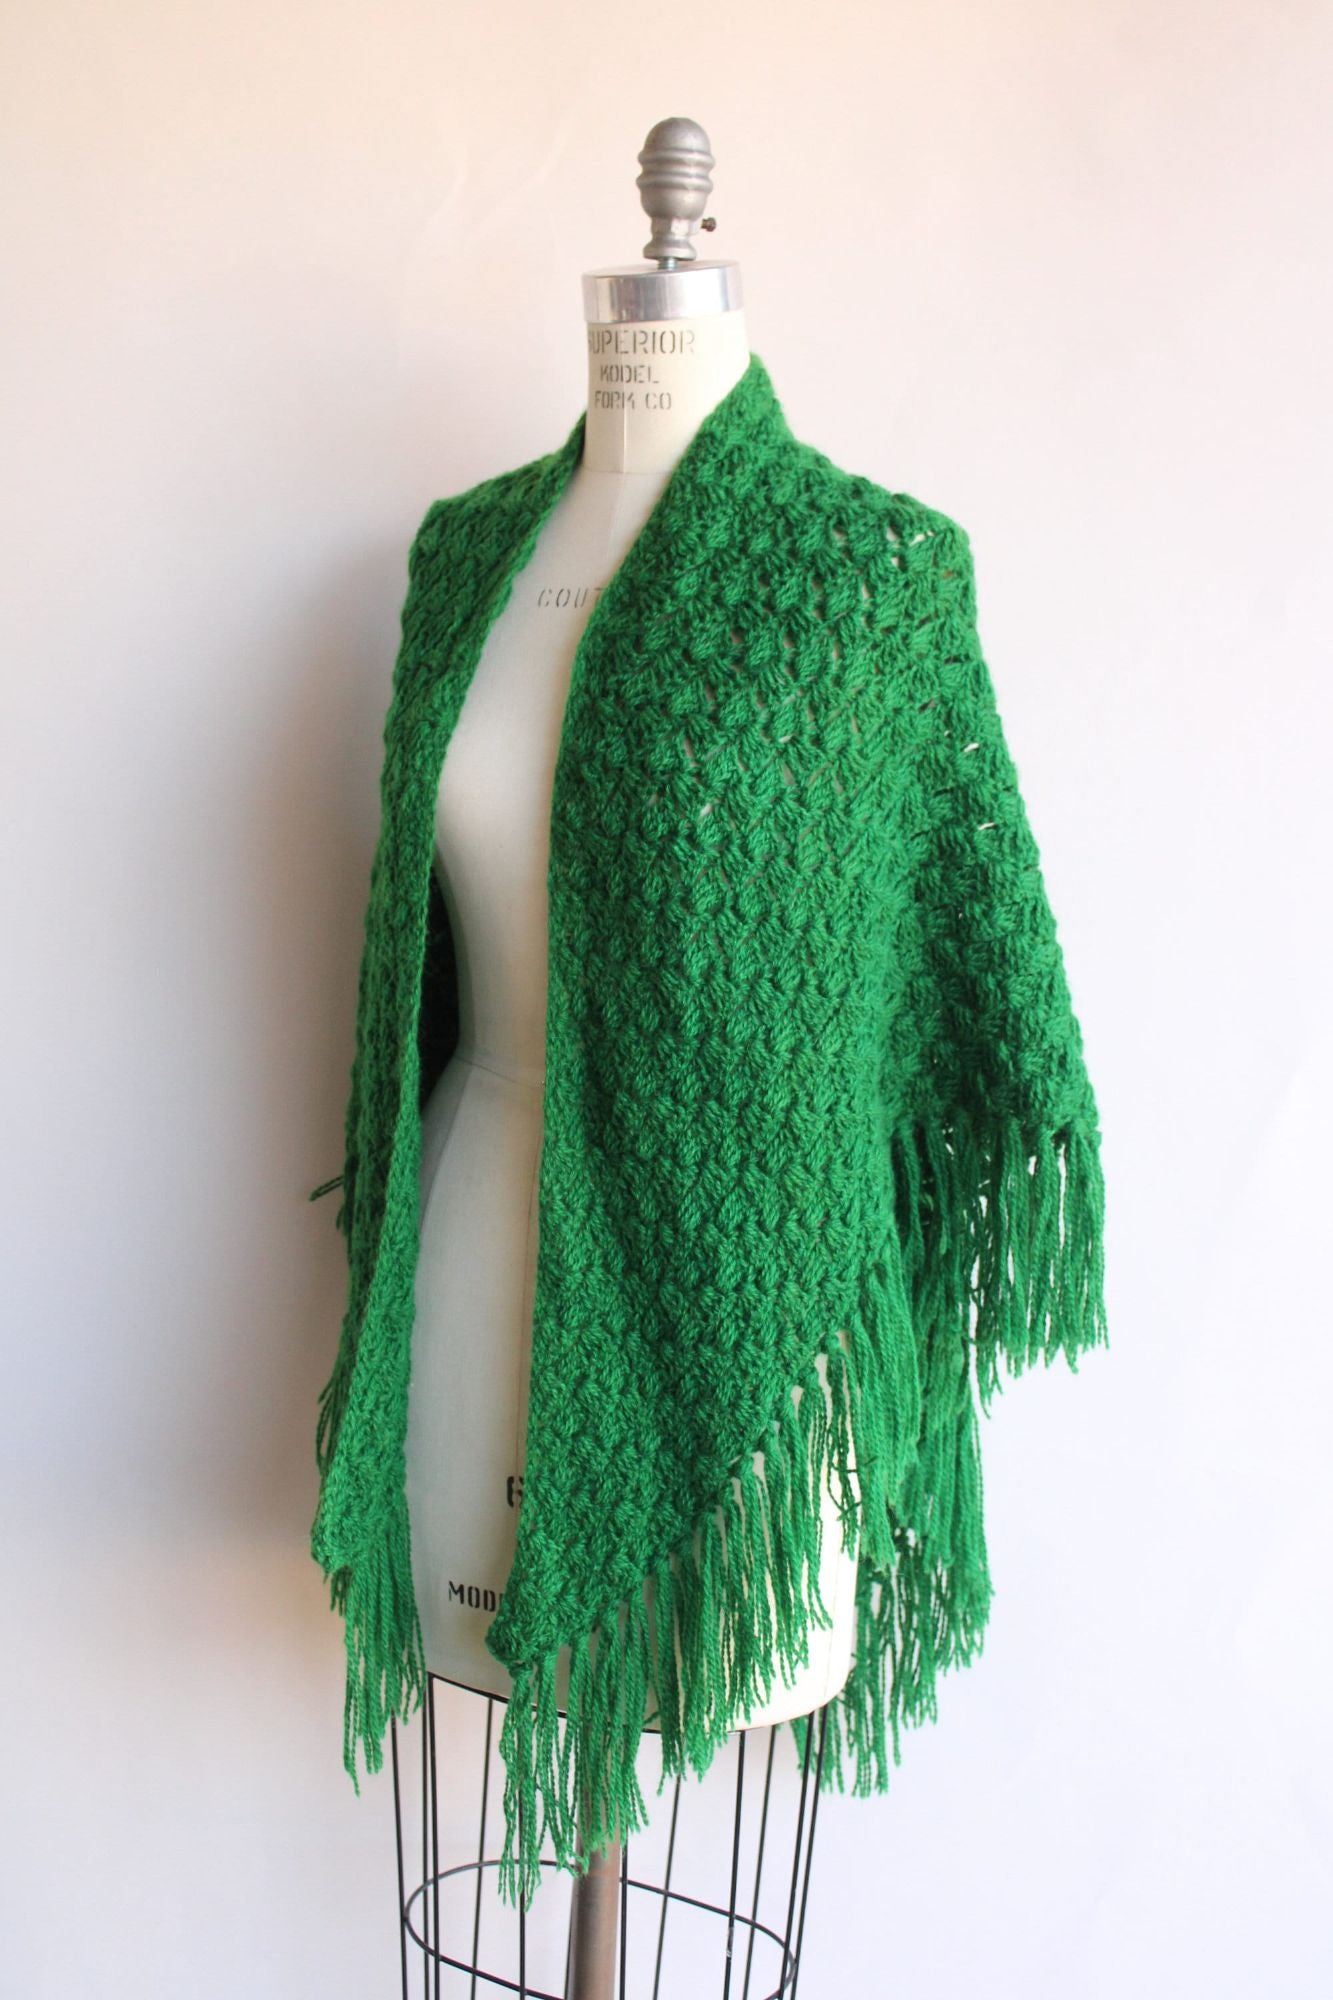 Vintage 1960s 1970s Green Knit with Fringe Shawl